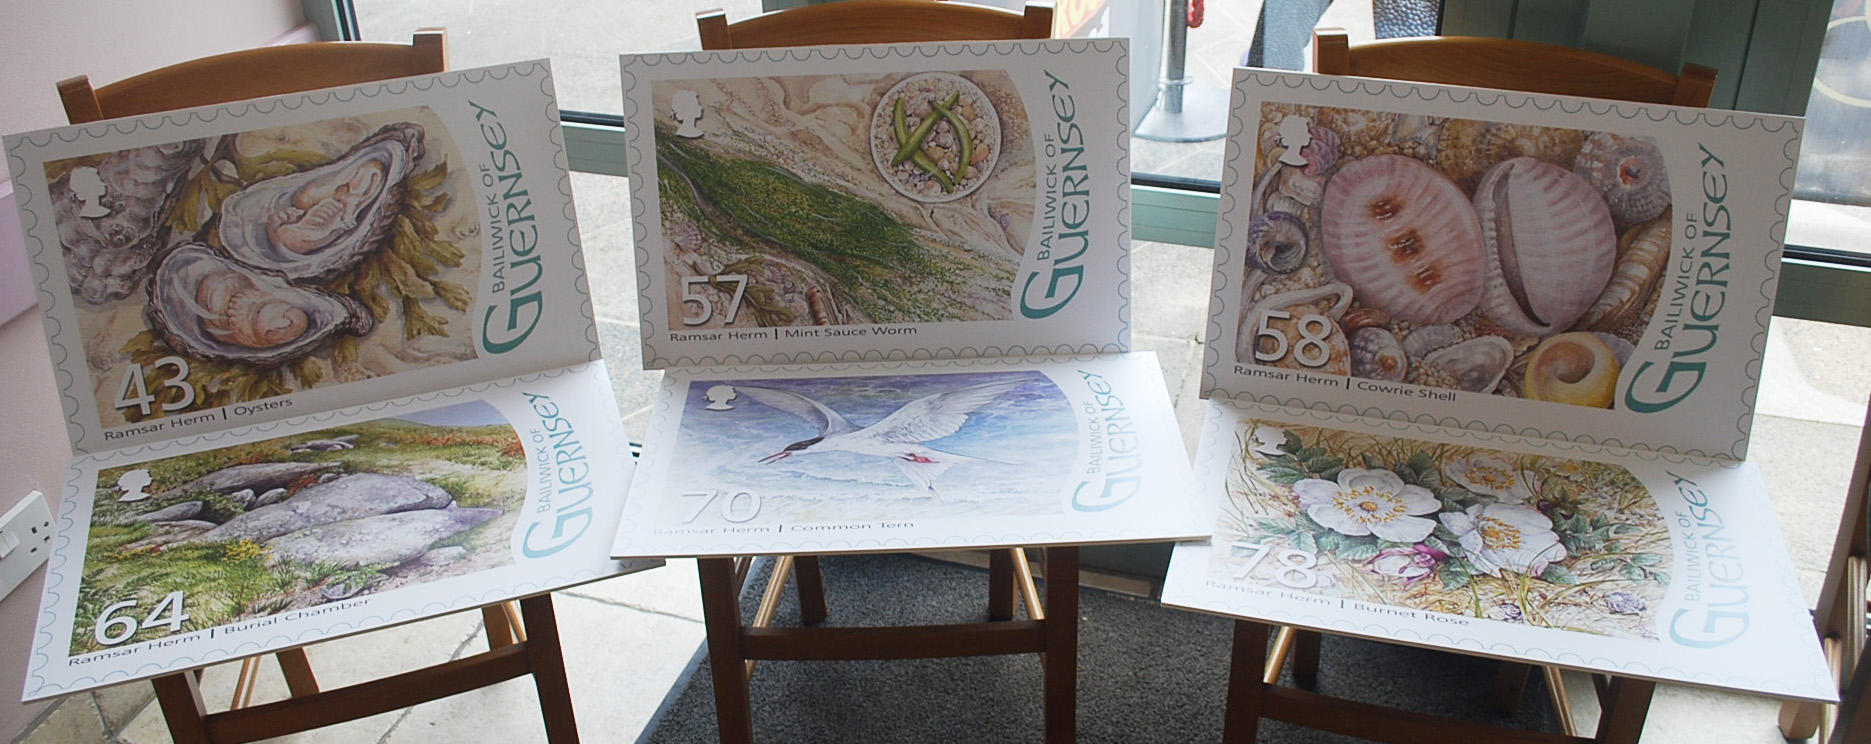 Launch of stamps mark formal designation of Herm, Jethou and The Humps